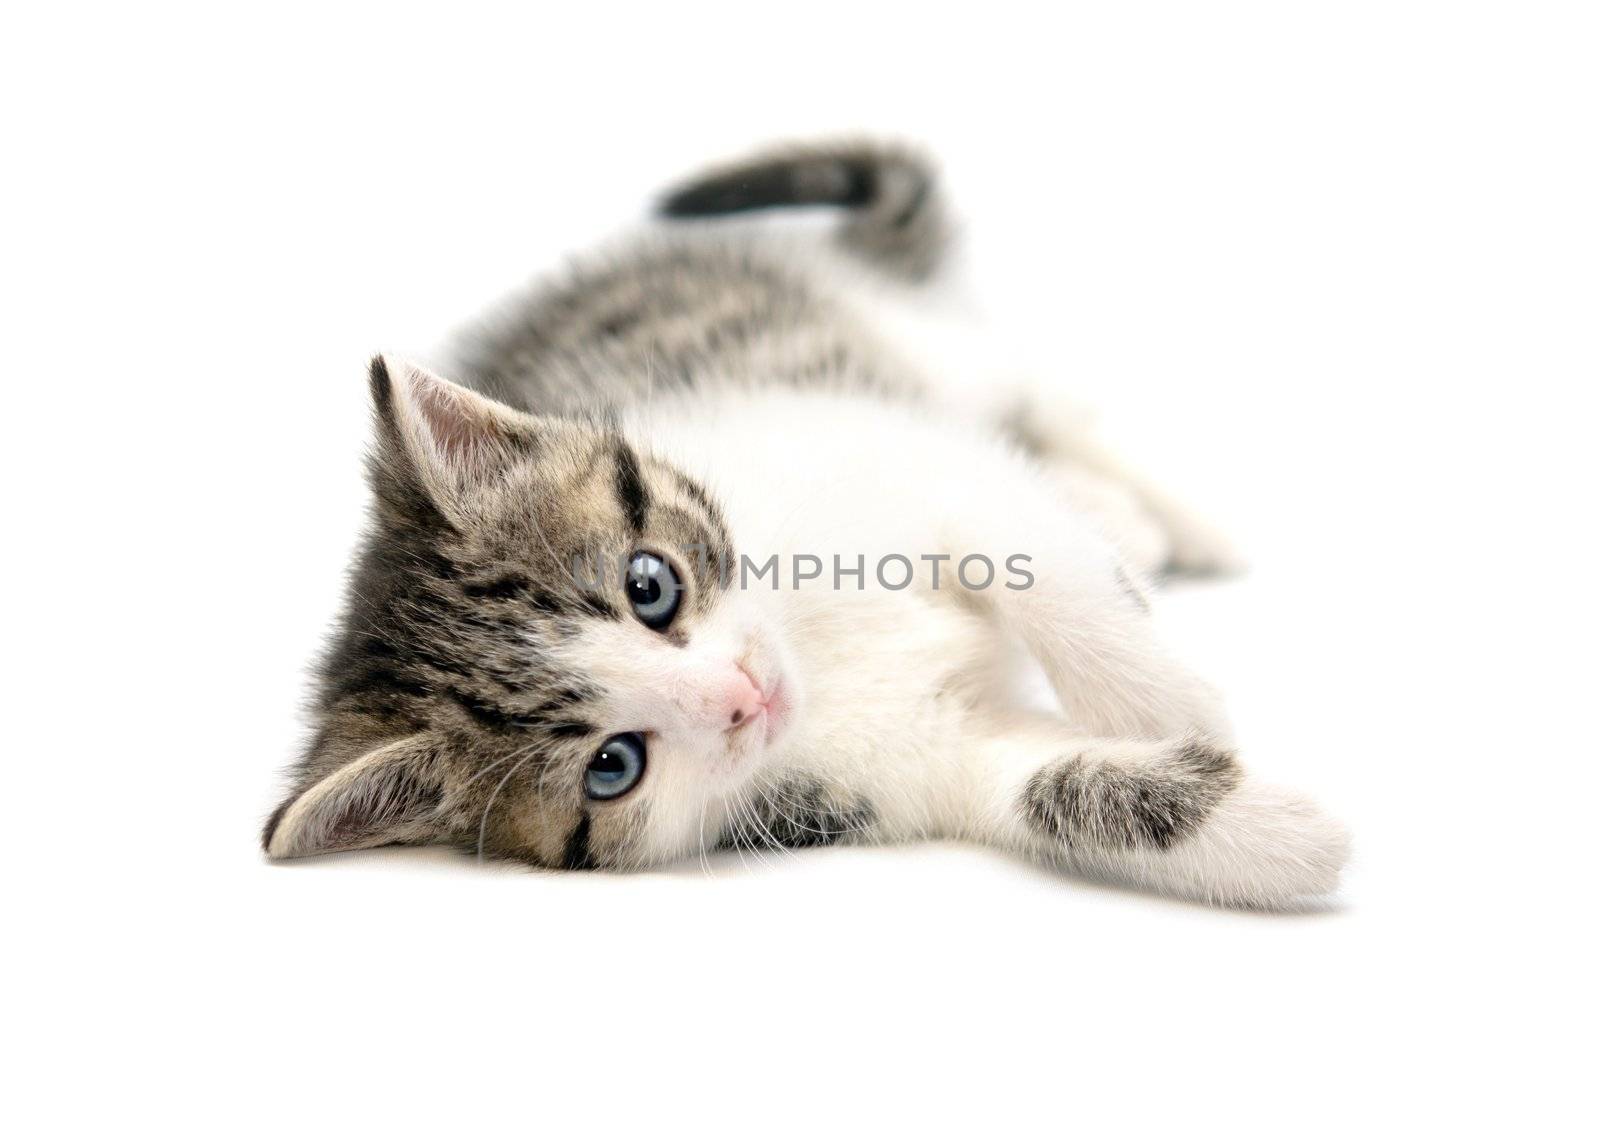 Young cat isolated on white background